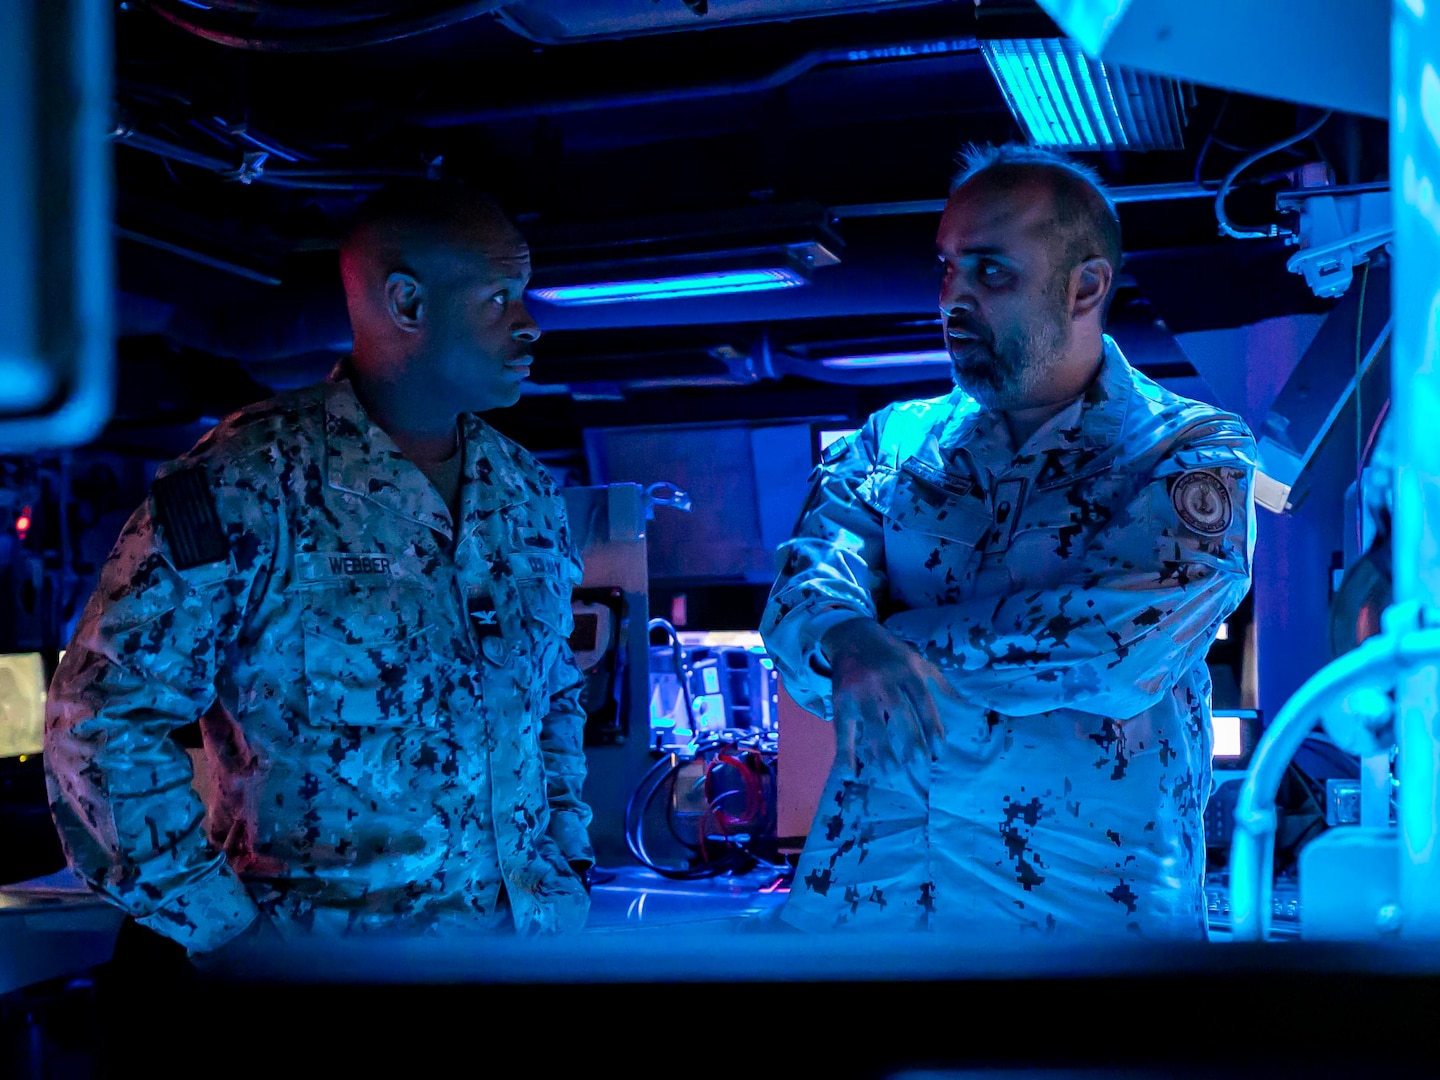 221105-N-UL352-1074 ARABIAN GULF (Nov. 5, 2022) Capt. Anthony Webber, deputy commander of Destroyer Squadron 50, left, speaks with a member of the United Arab Emirates armed forces aboard guided-missile destroyer USS Delbert D. Black (DDG 119) during exercise Nautical Defender in the Arabian Gulf, Nov. 5. The multilateral training event involved U.S. Naval Forces Central Command, Royal Saudi Navy’s Eastern Fleet and UK’s Royal Navy, with observers from several regional countries.